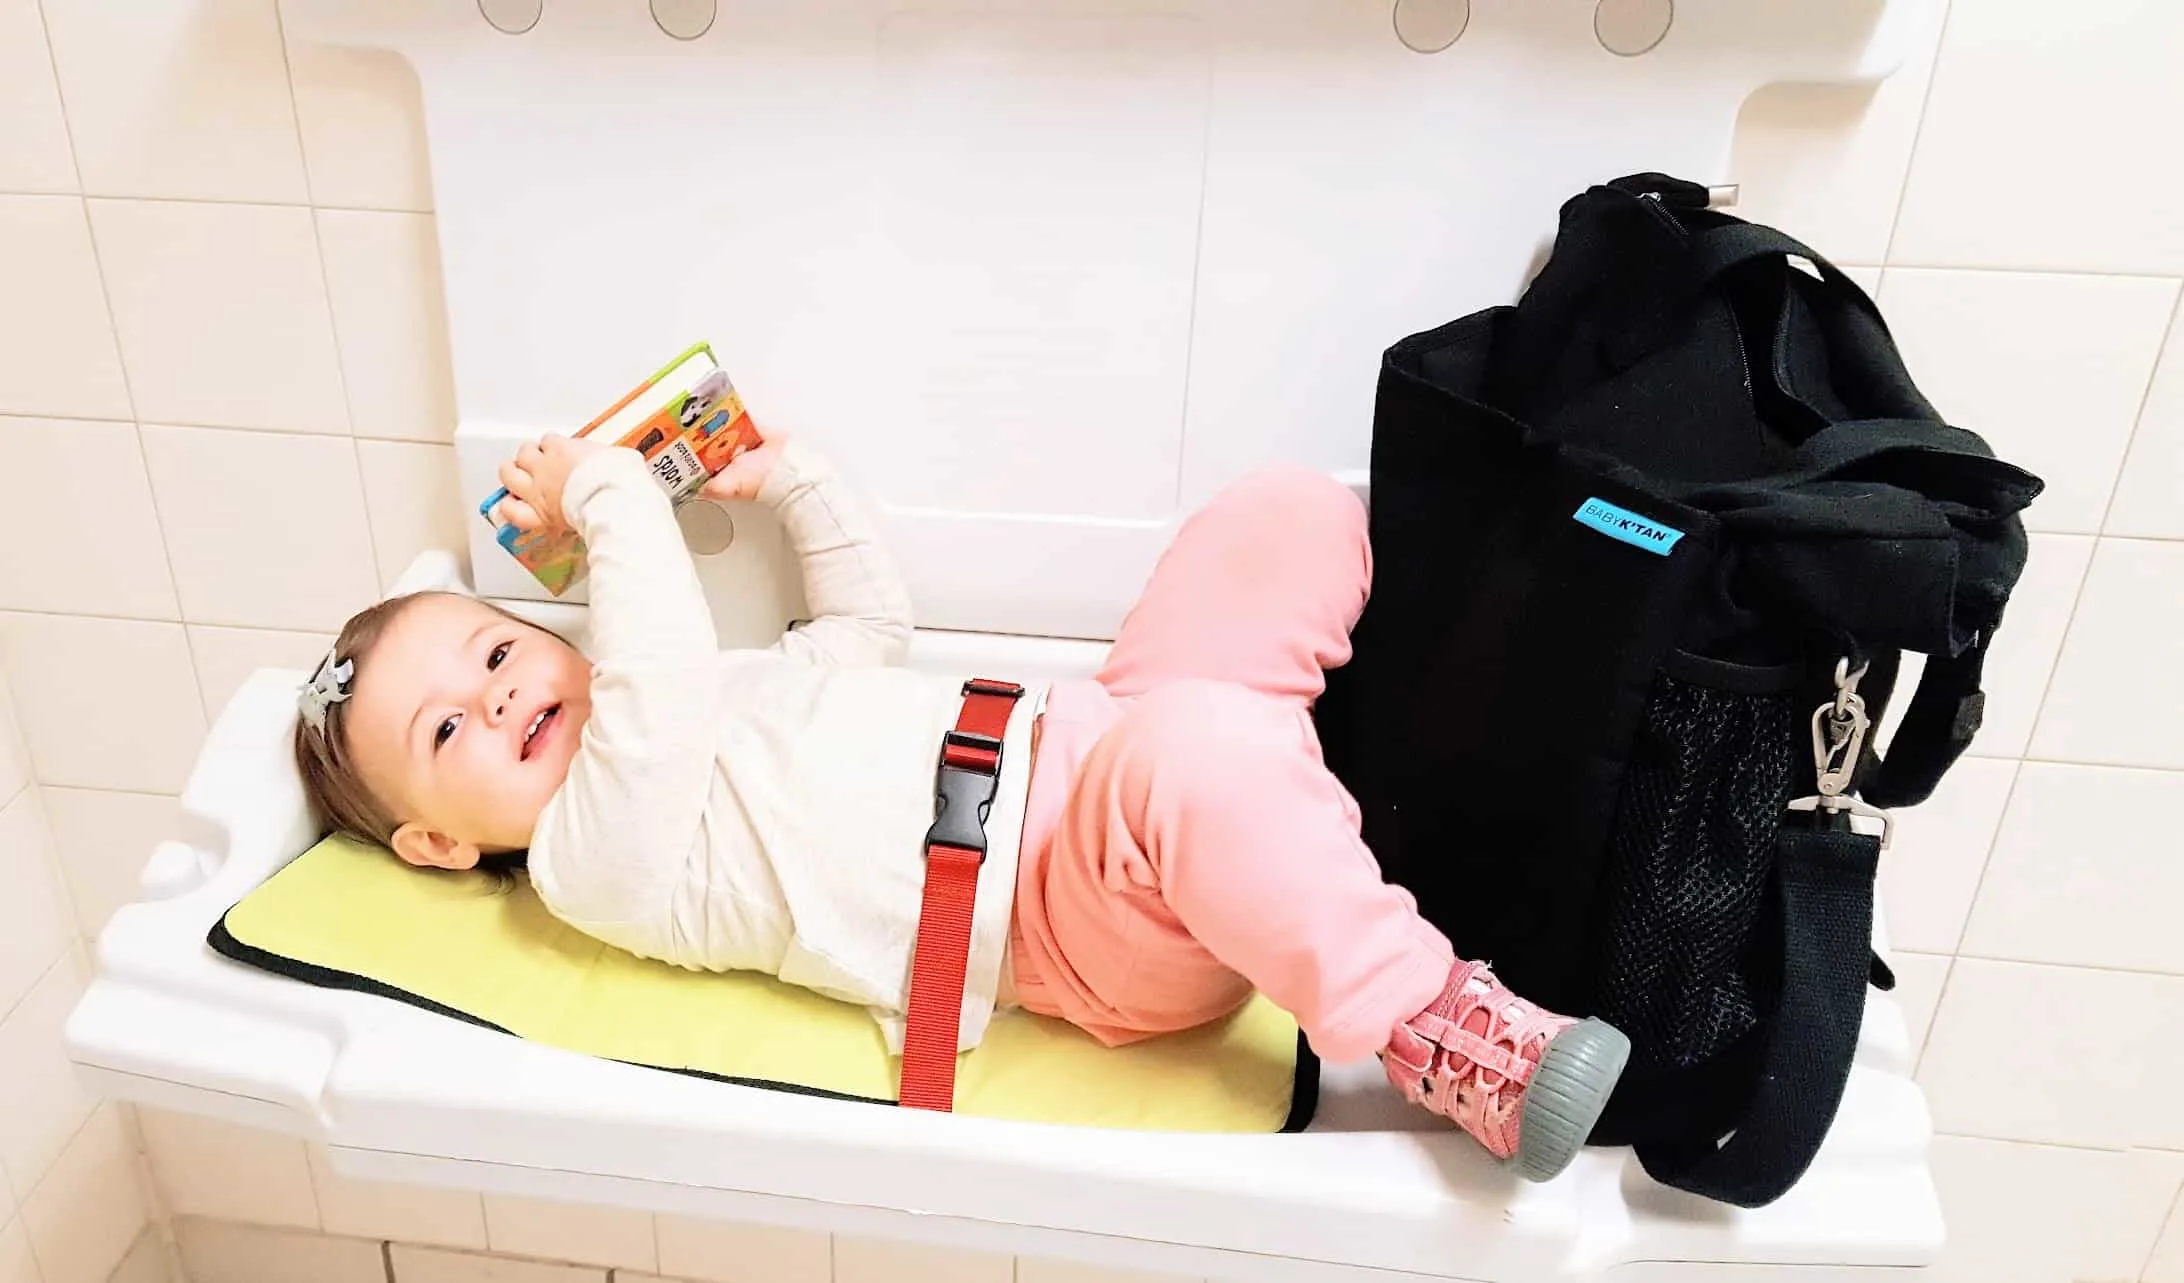 Little girl strapped into changing table in restroom.